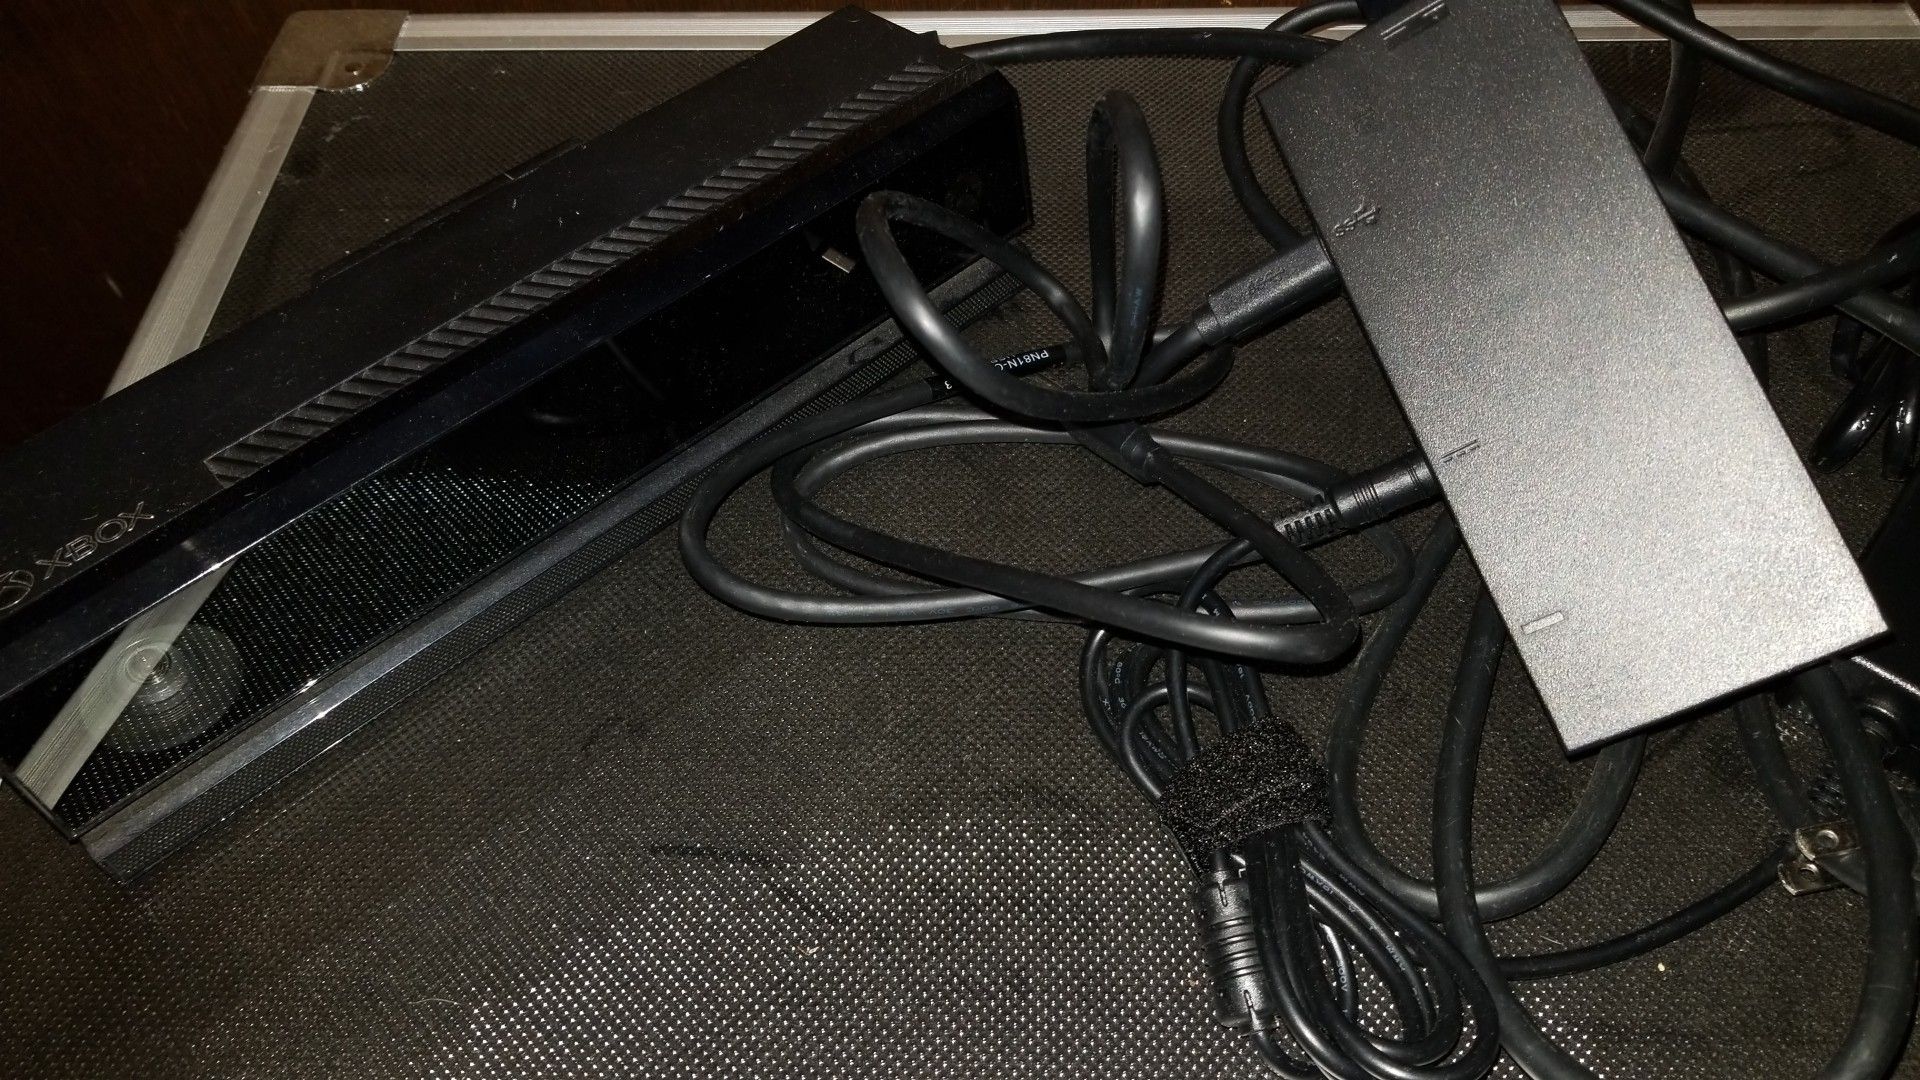 Xbox One Kinect w/ adapter